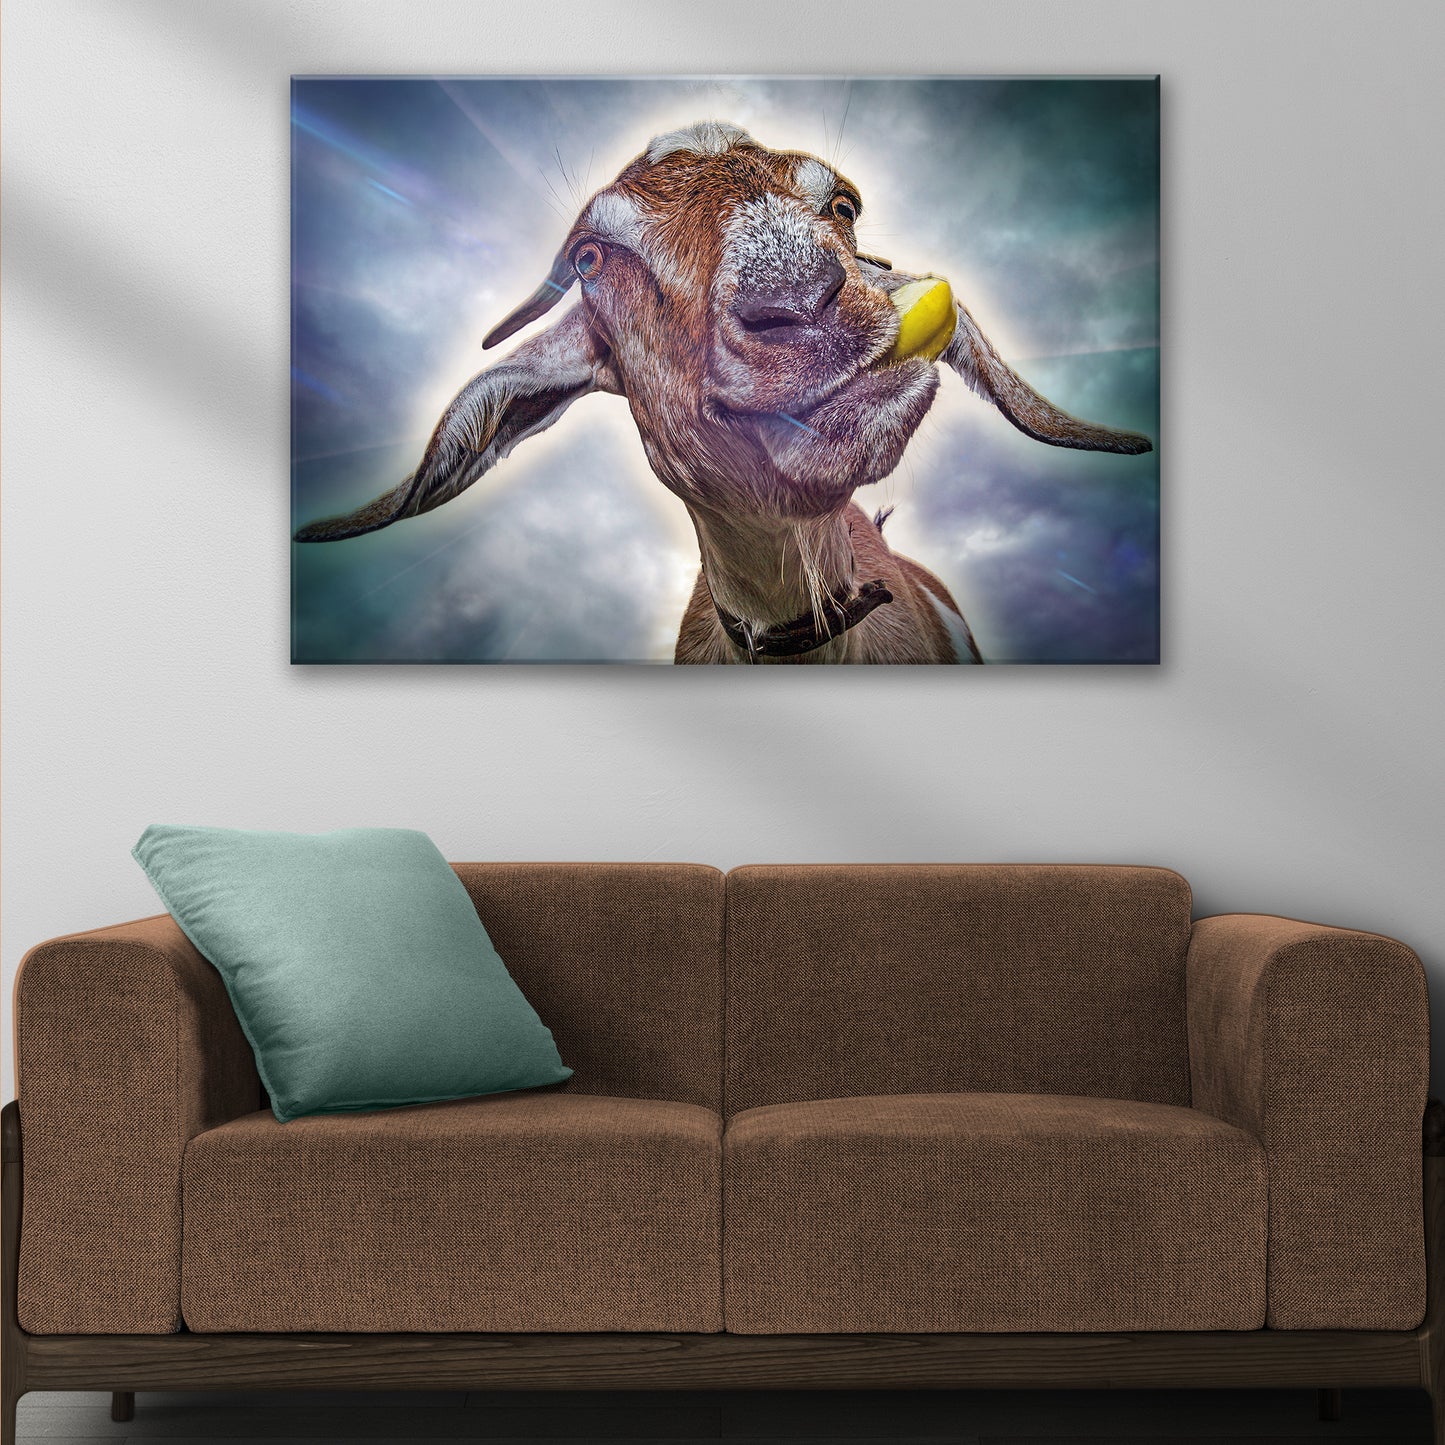 Wacky Nubian Goat Canvas Wall Art Style 2 - Image by Tailored Canvases